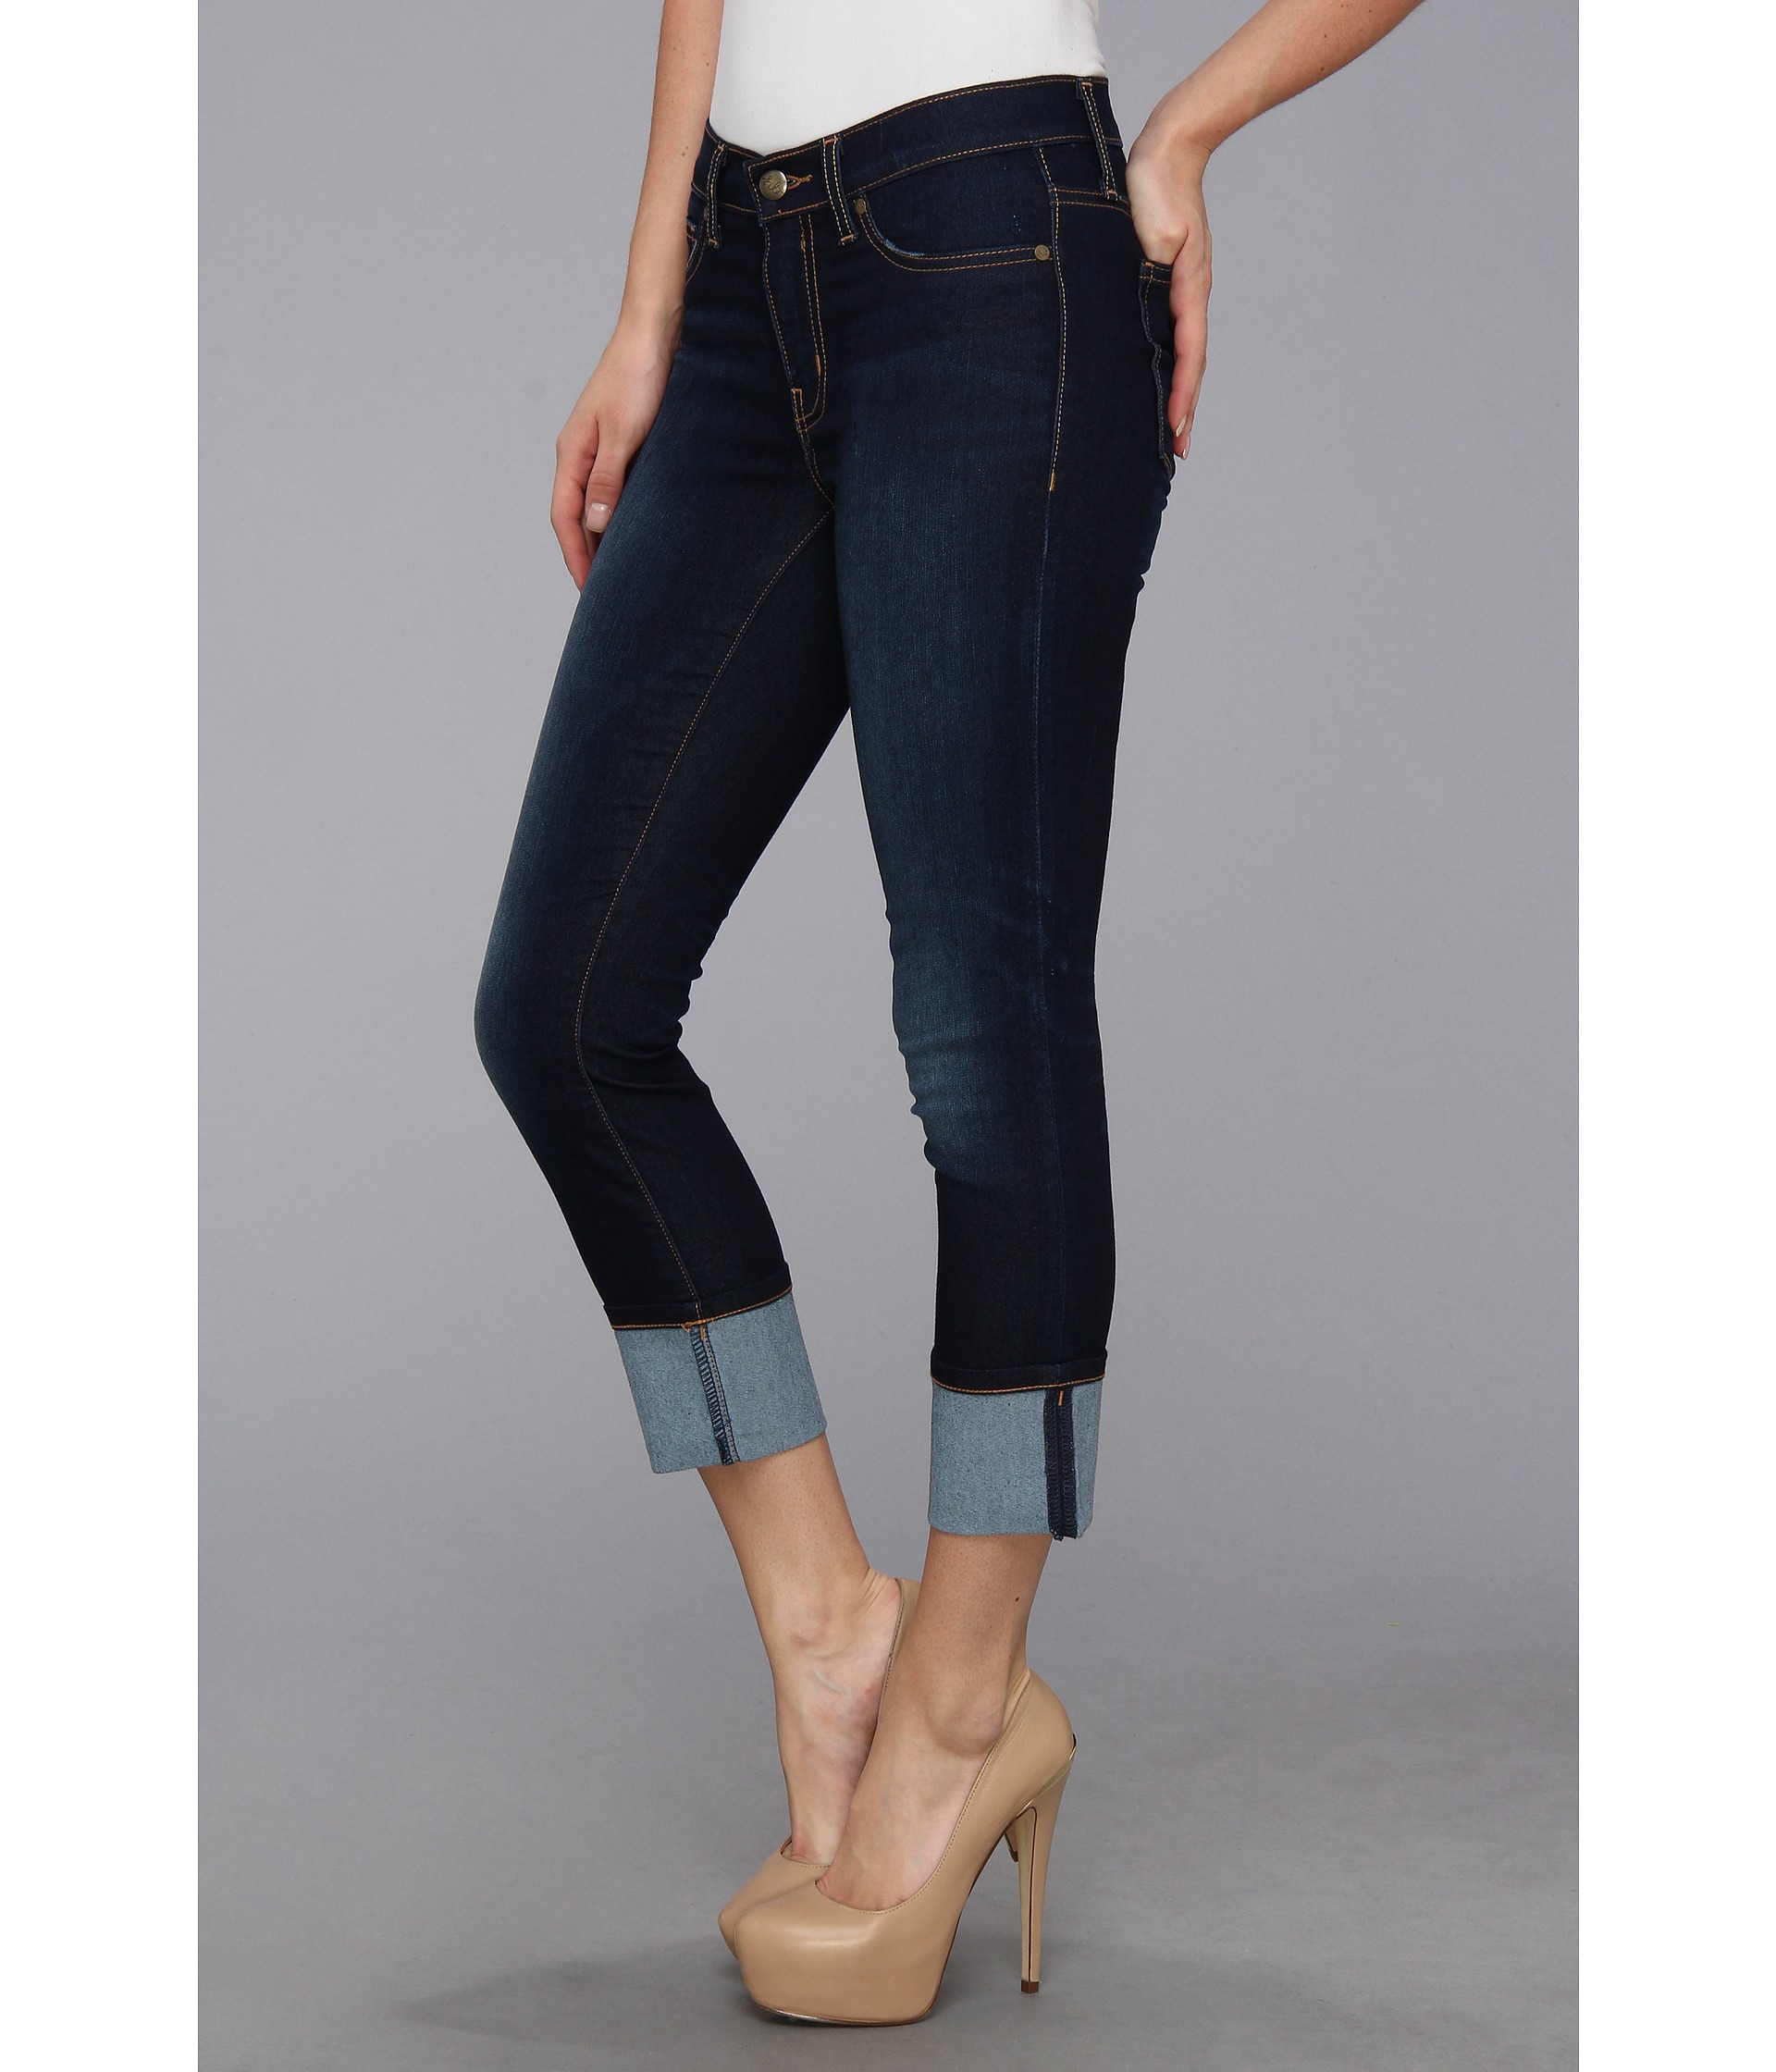 henry and belle jeans nordstrom